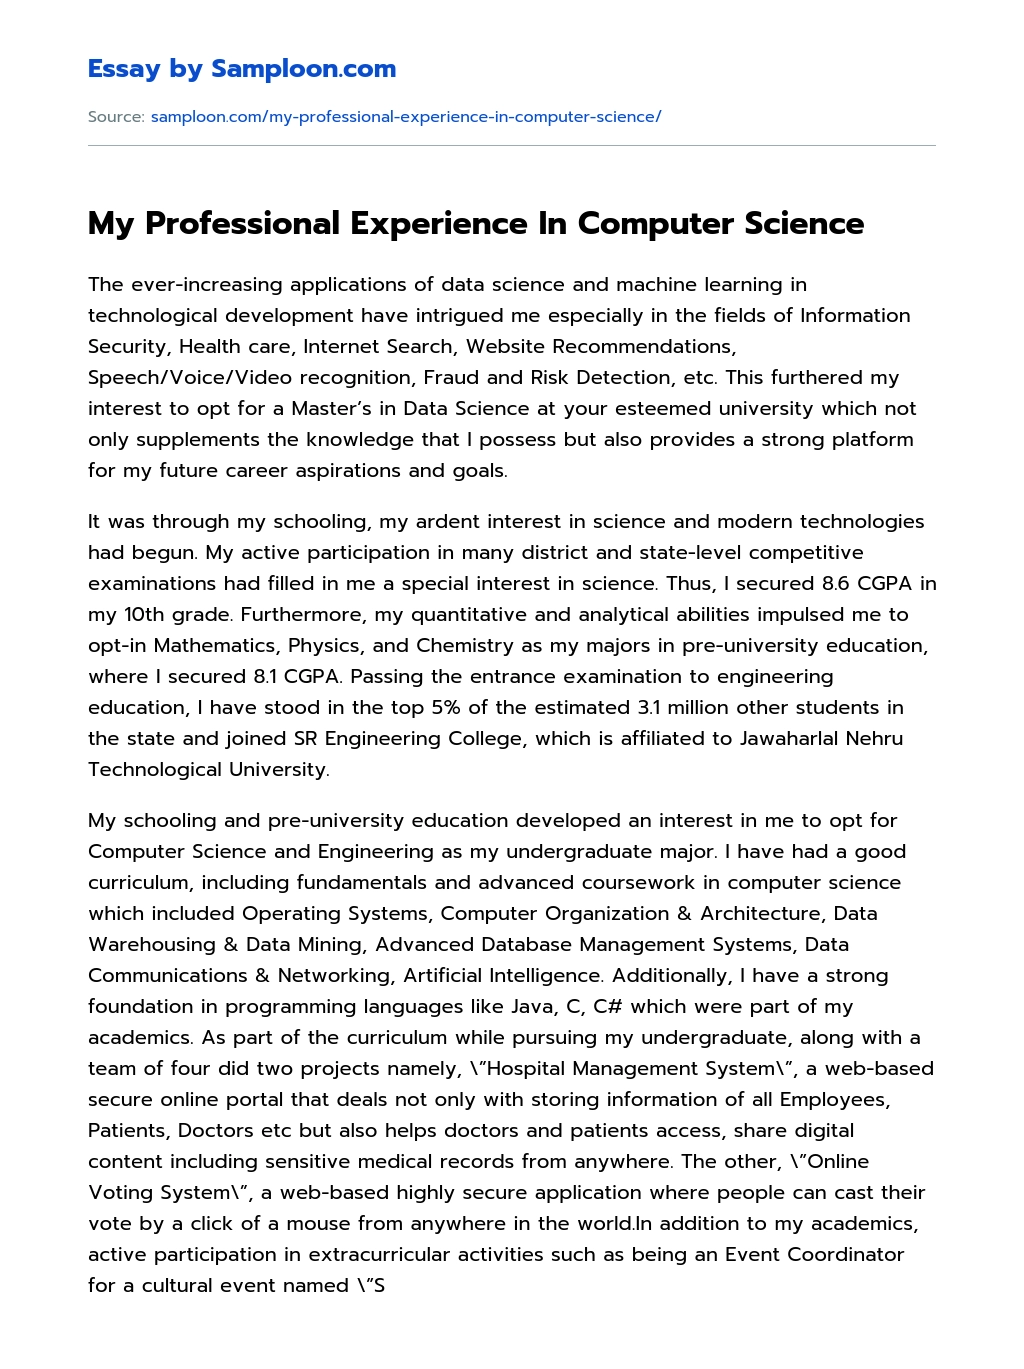 My Professional Experience In Computer Science essay